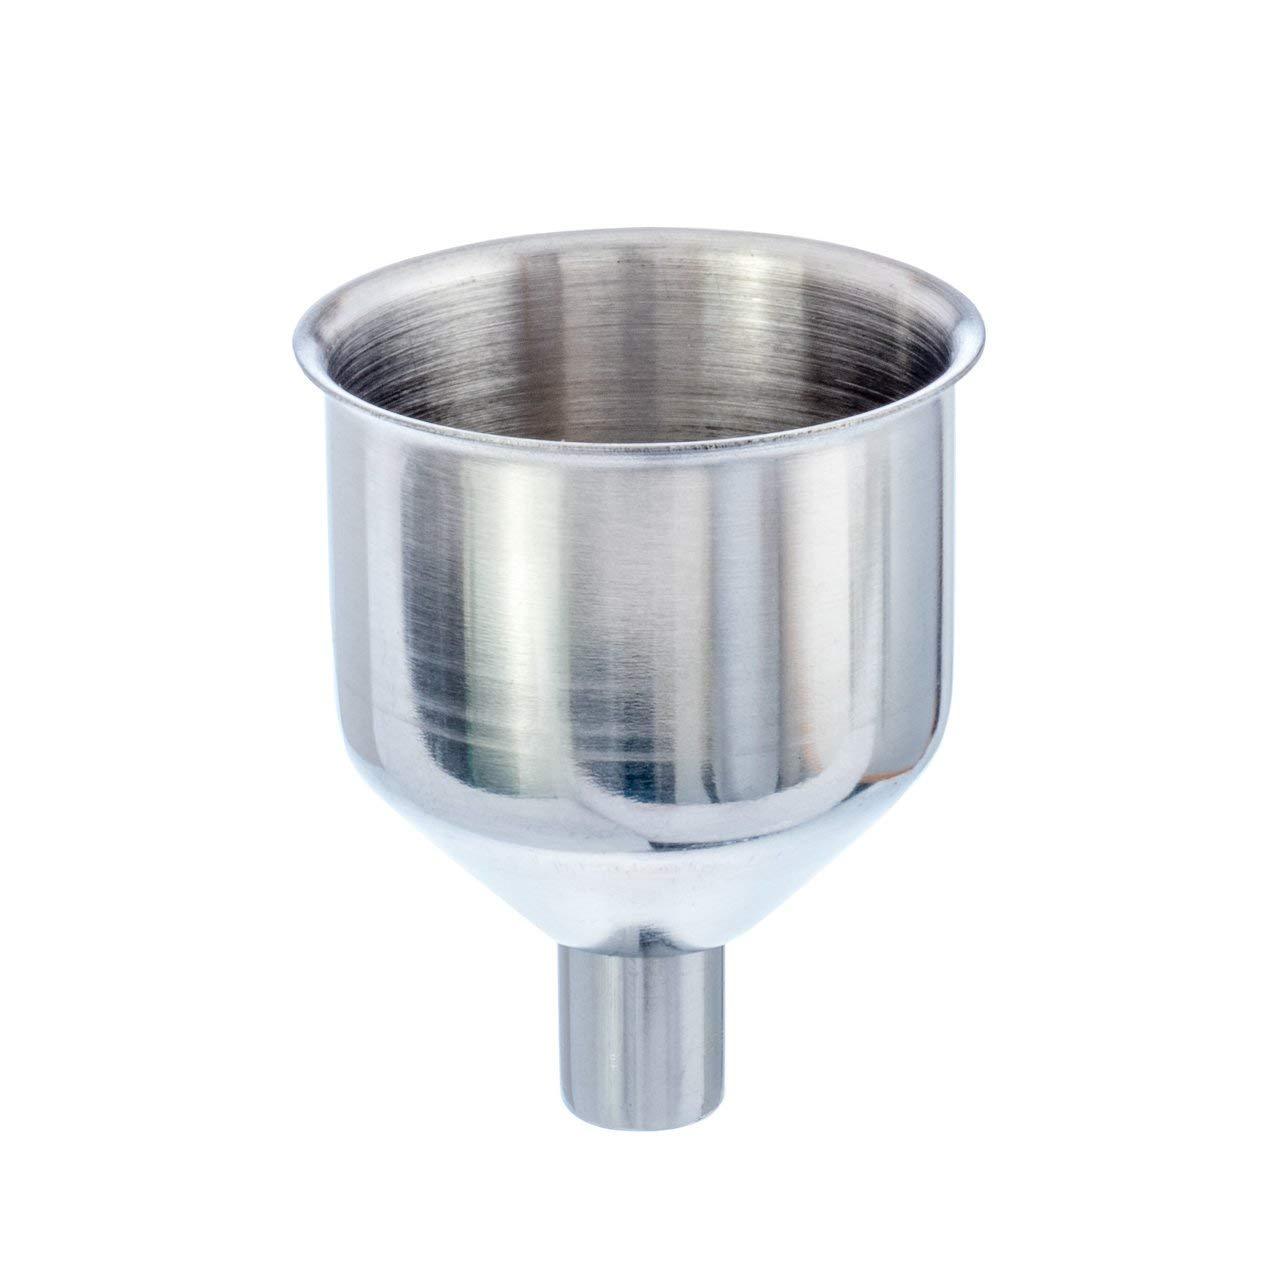 1.5" Dia Stainless Steel Funnel, Useful for Flasks with 3/8" Spout Gold Prospecting,Accessories Jobe 